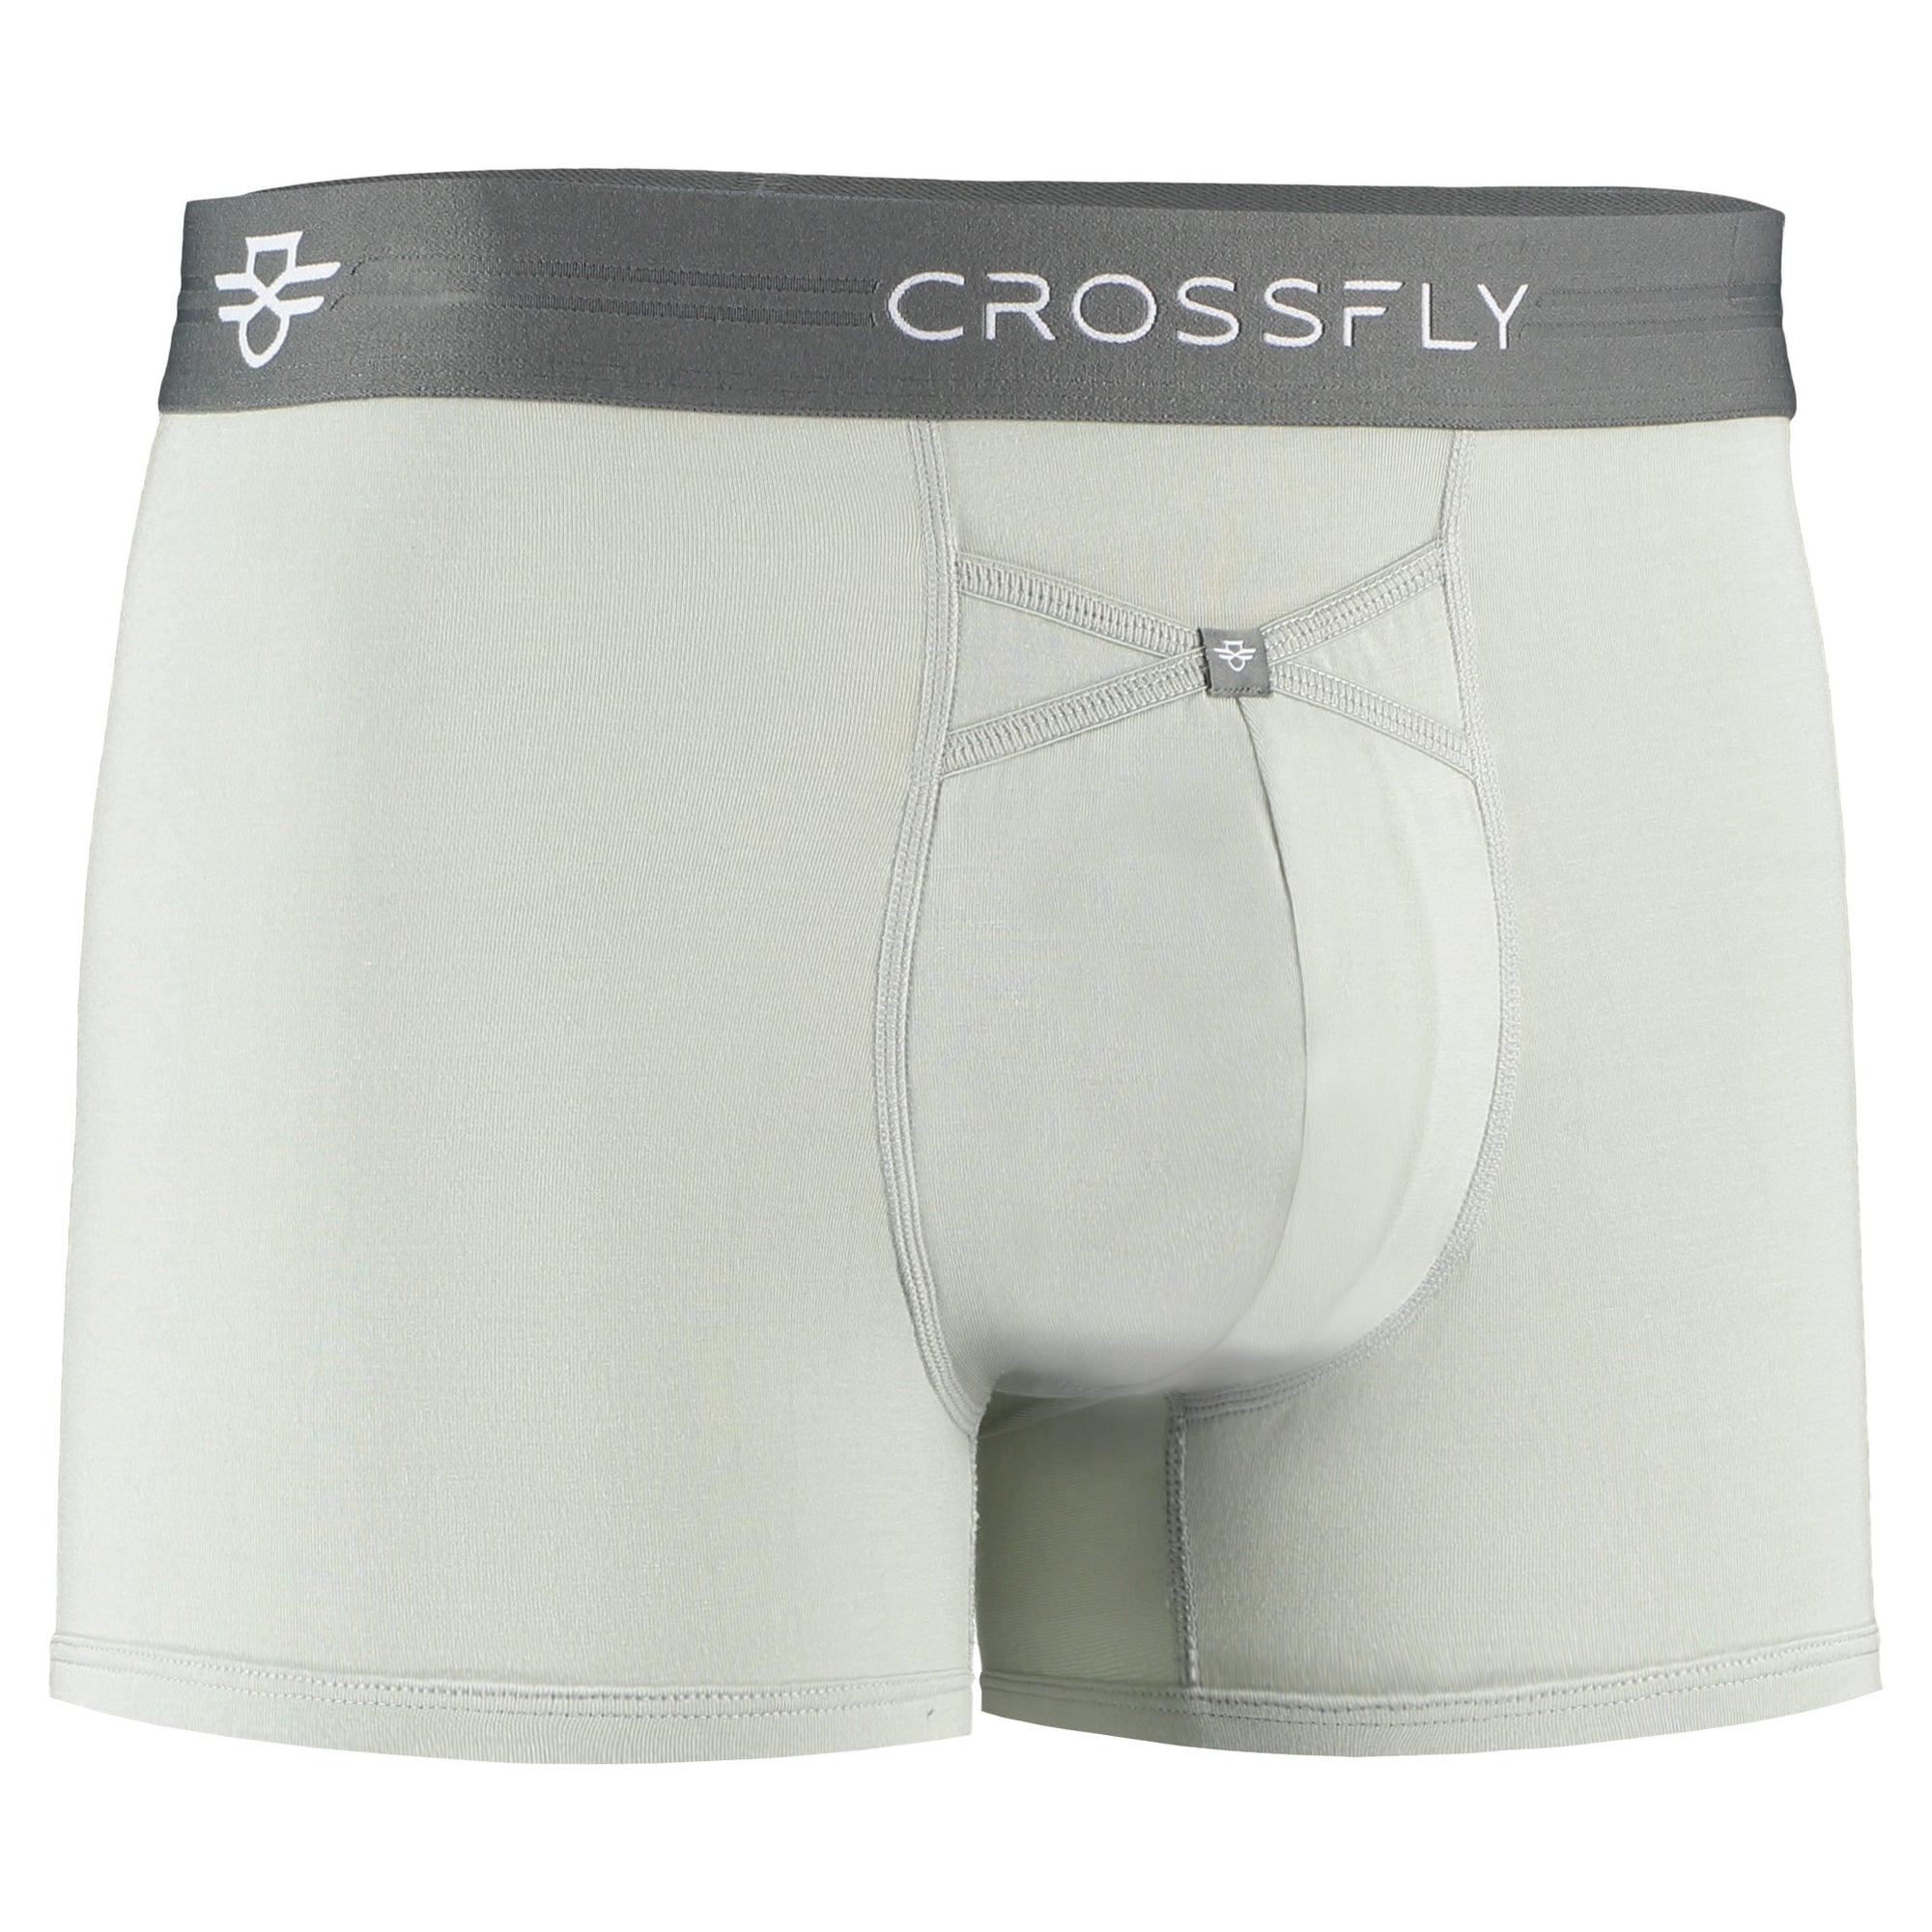 Crossfly men's IKON X 3" silver / charcoal trunks from the Everyday series, featuring X-Fly and Coccoon internal pocket support.